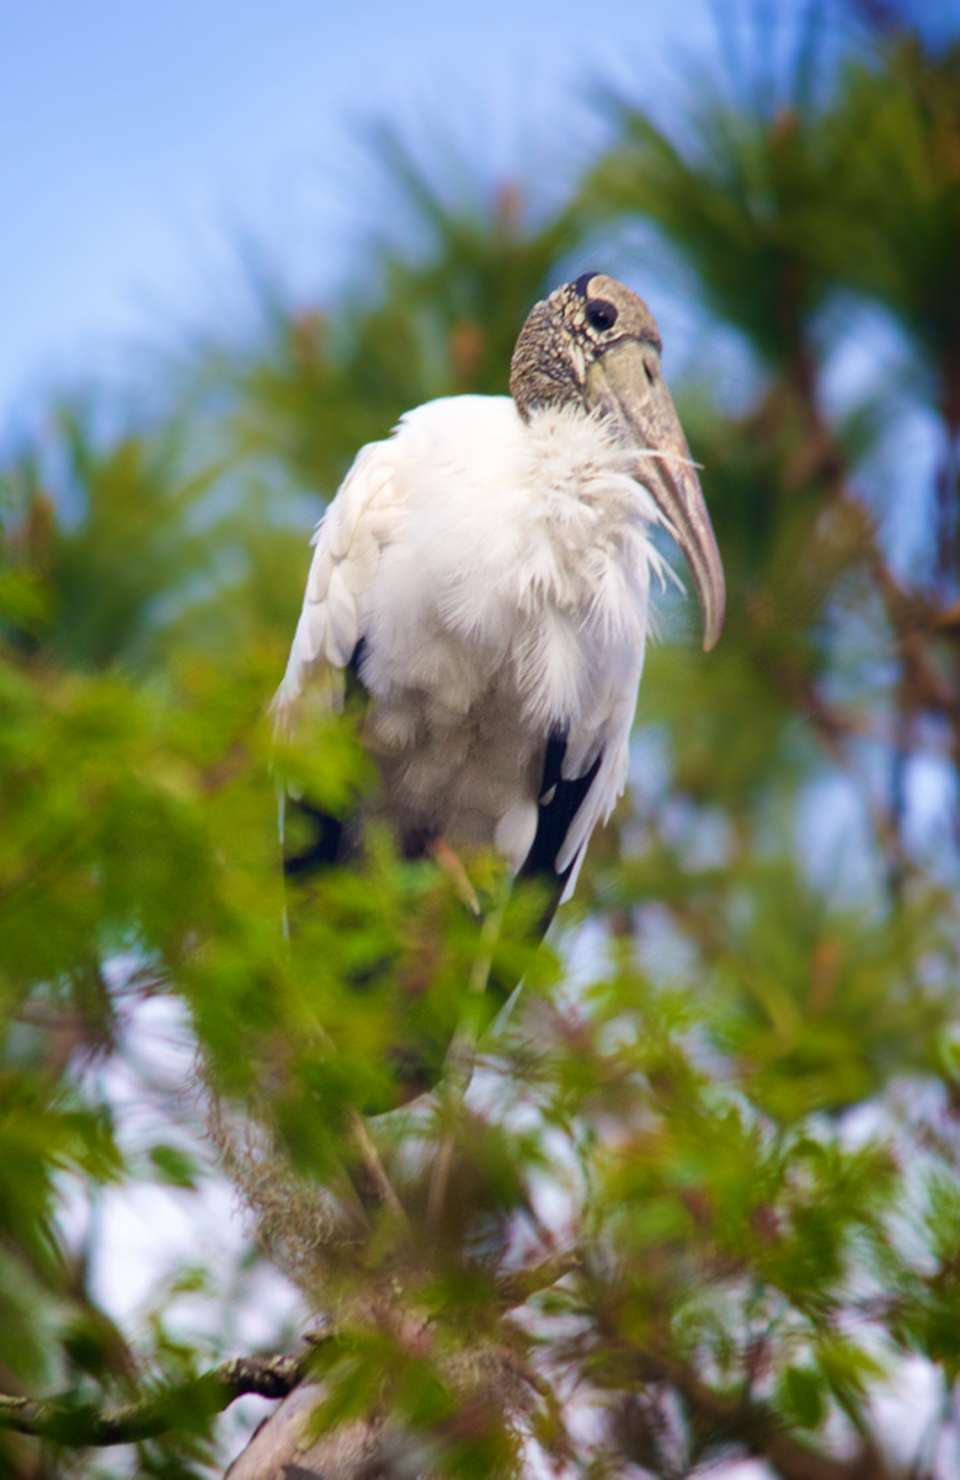 Another look at a wood stork at the Cypress Wetlands.